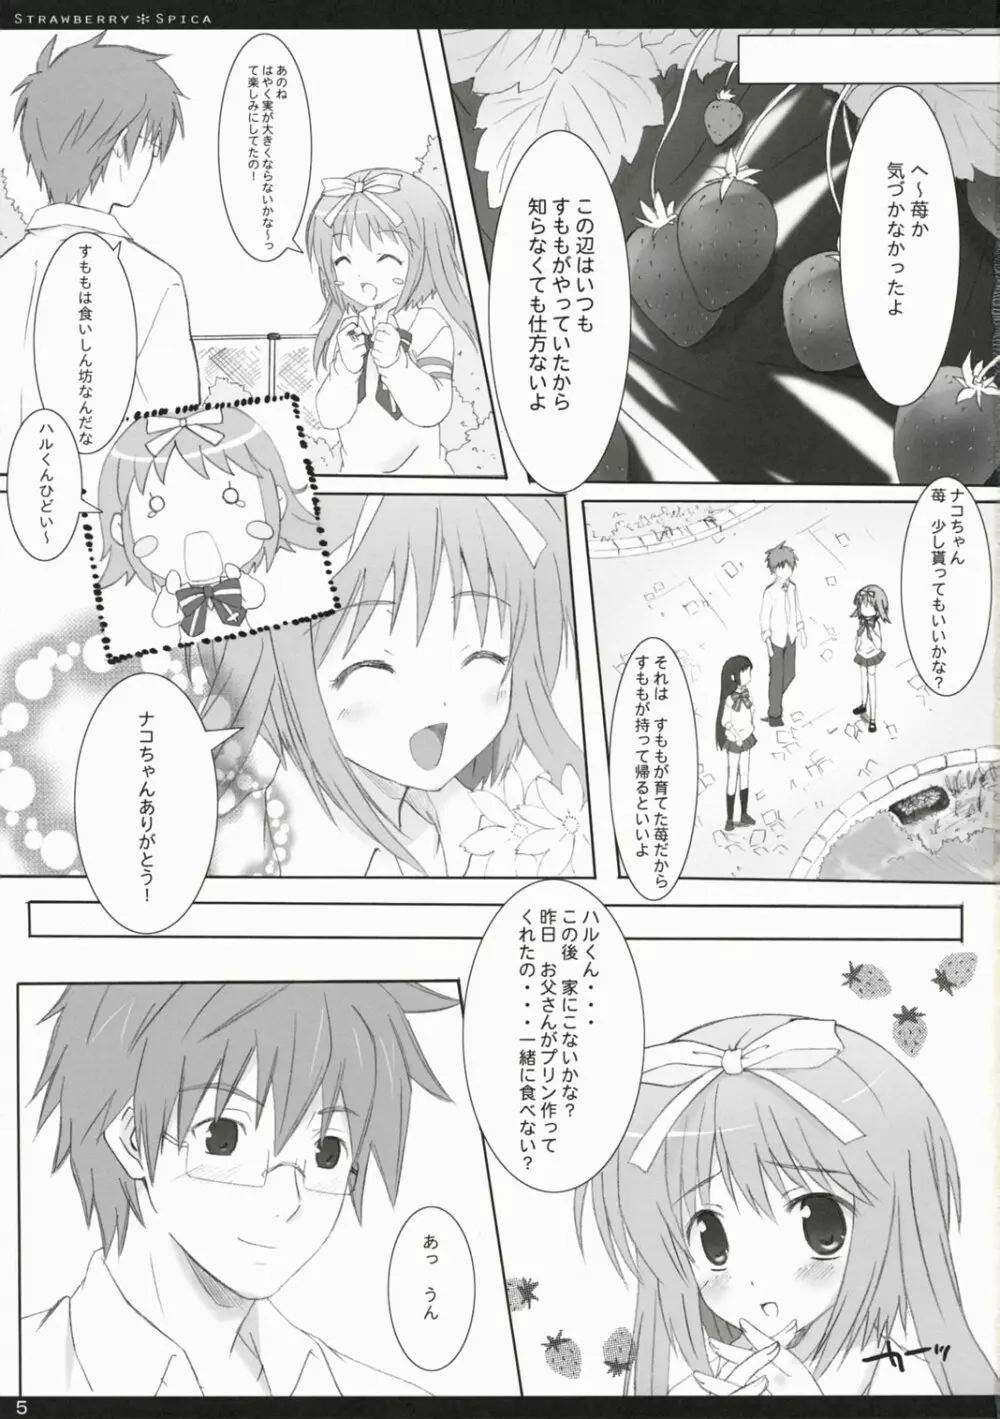 Strawberry Spica - page4